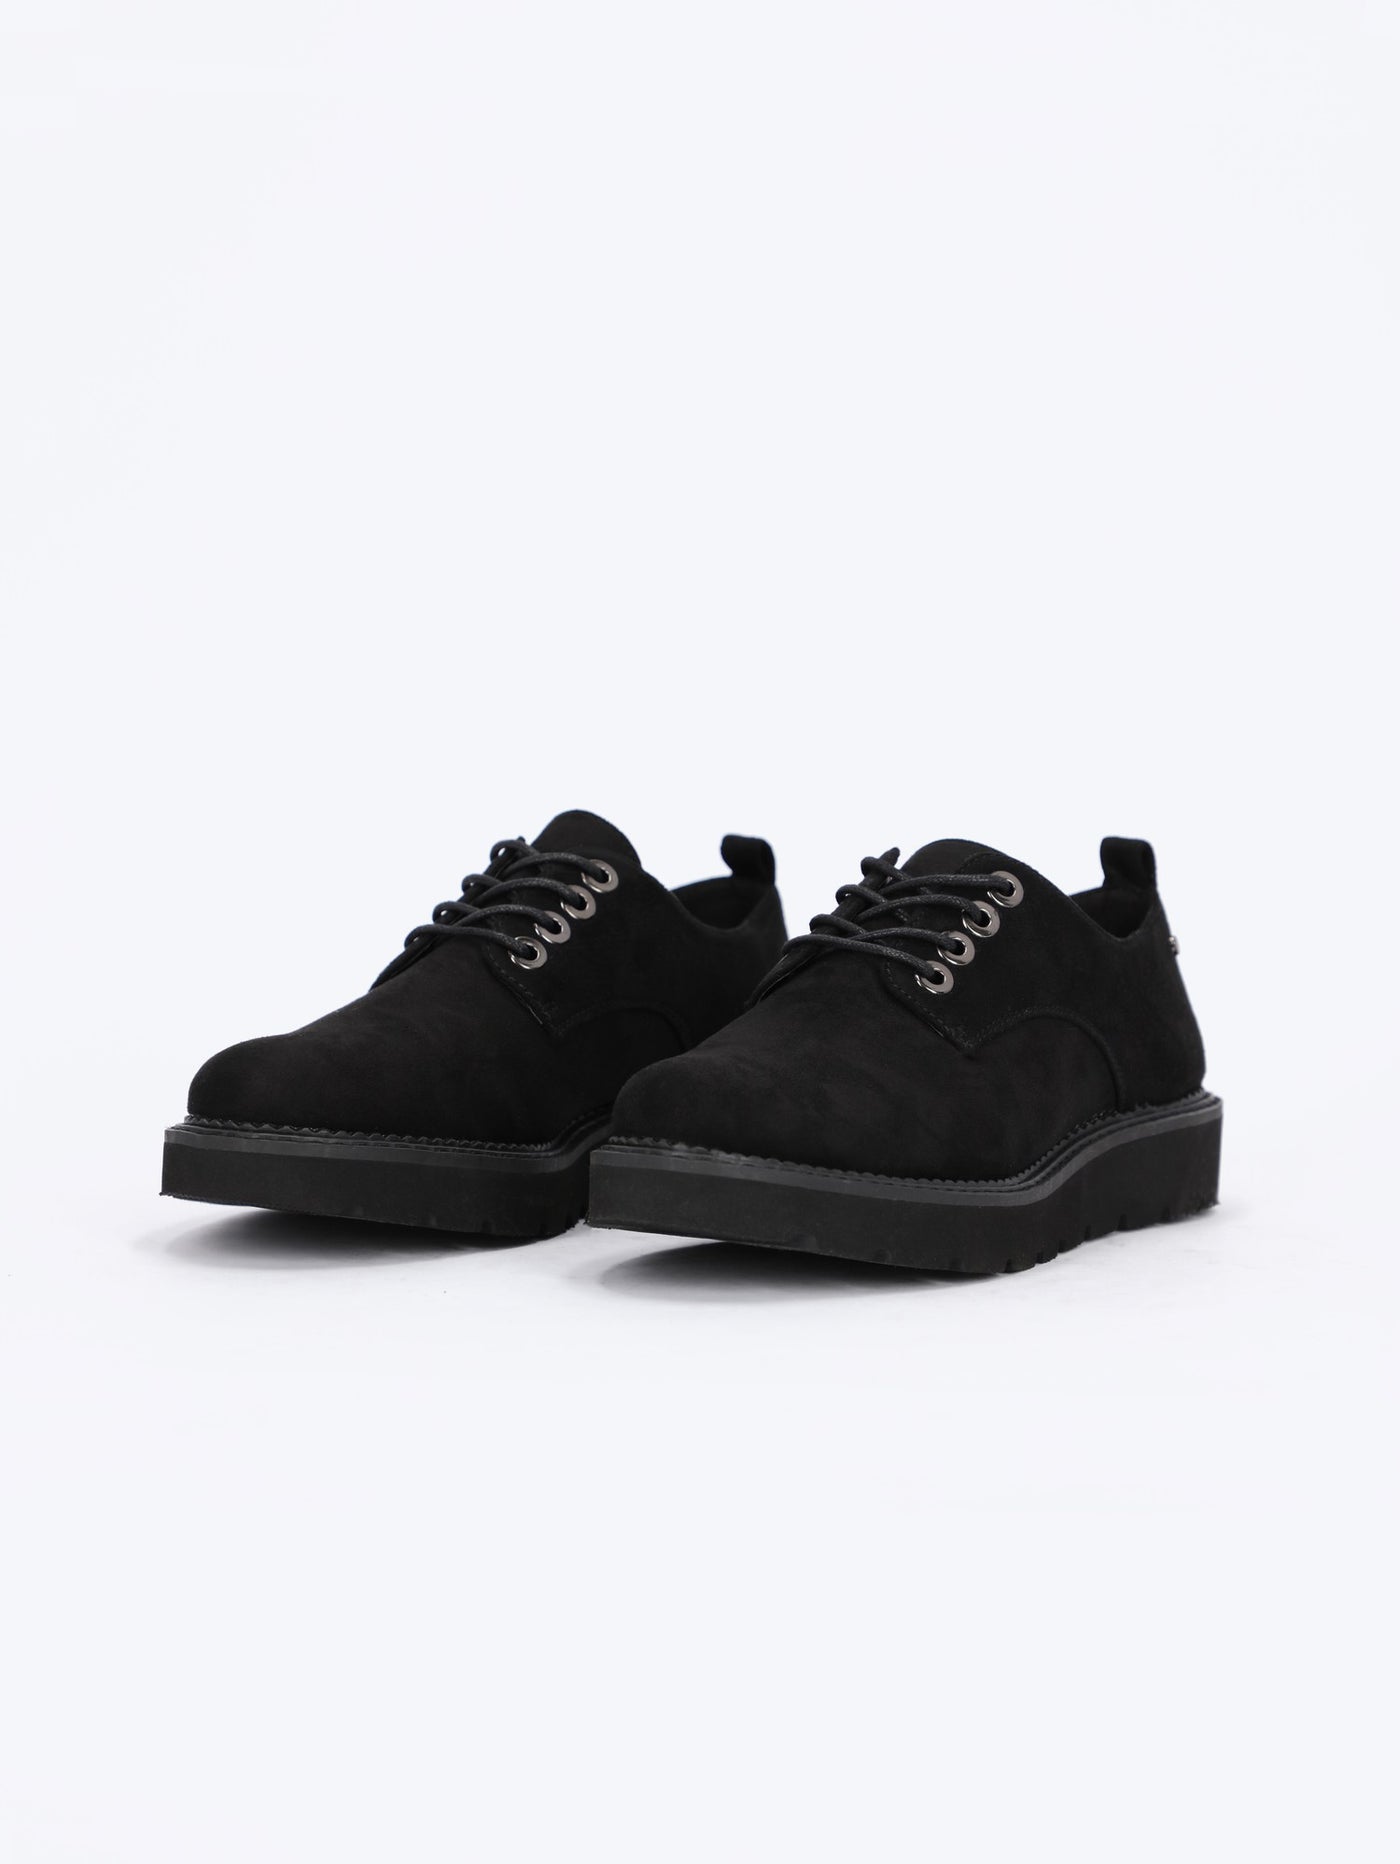 Lace-up Front Classic Oxford shoes